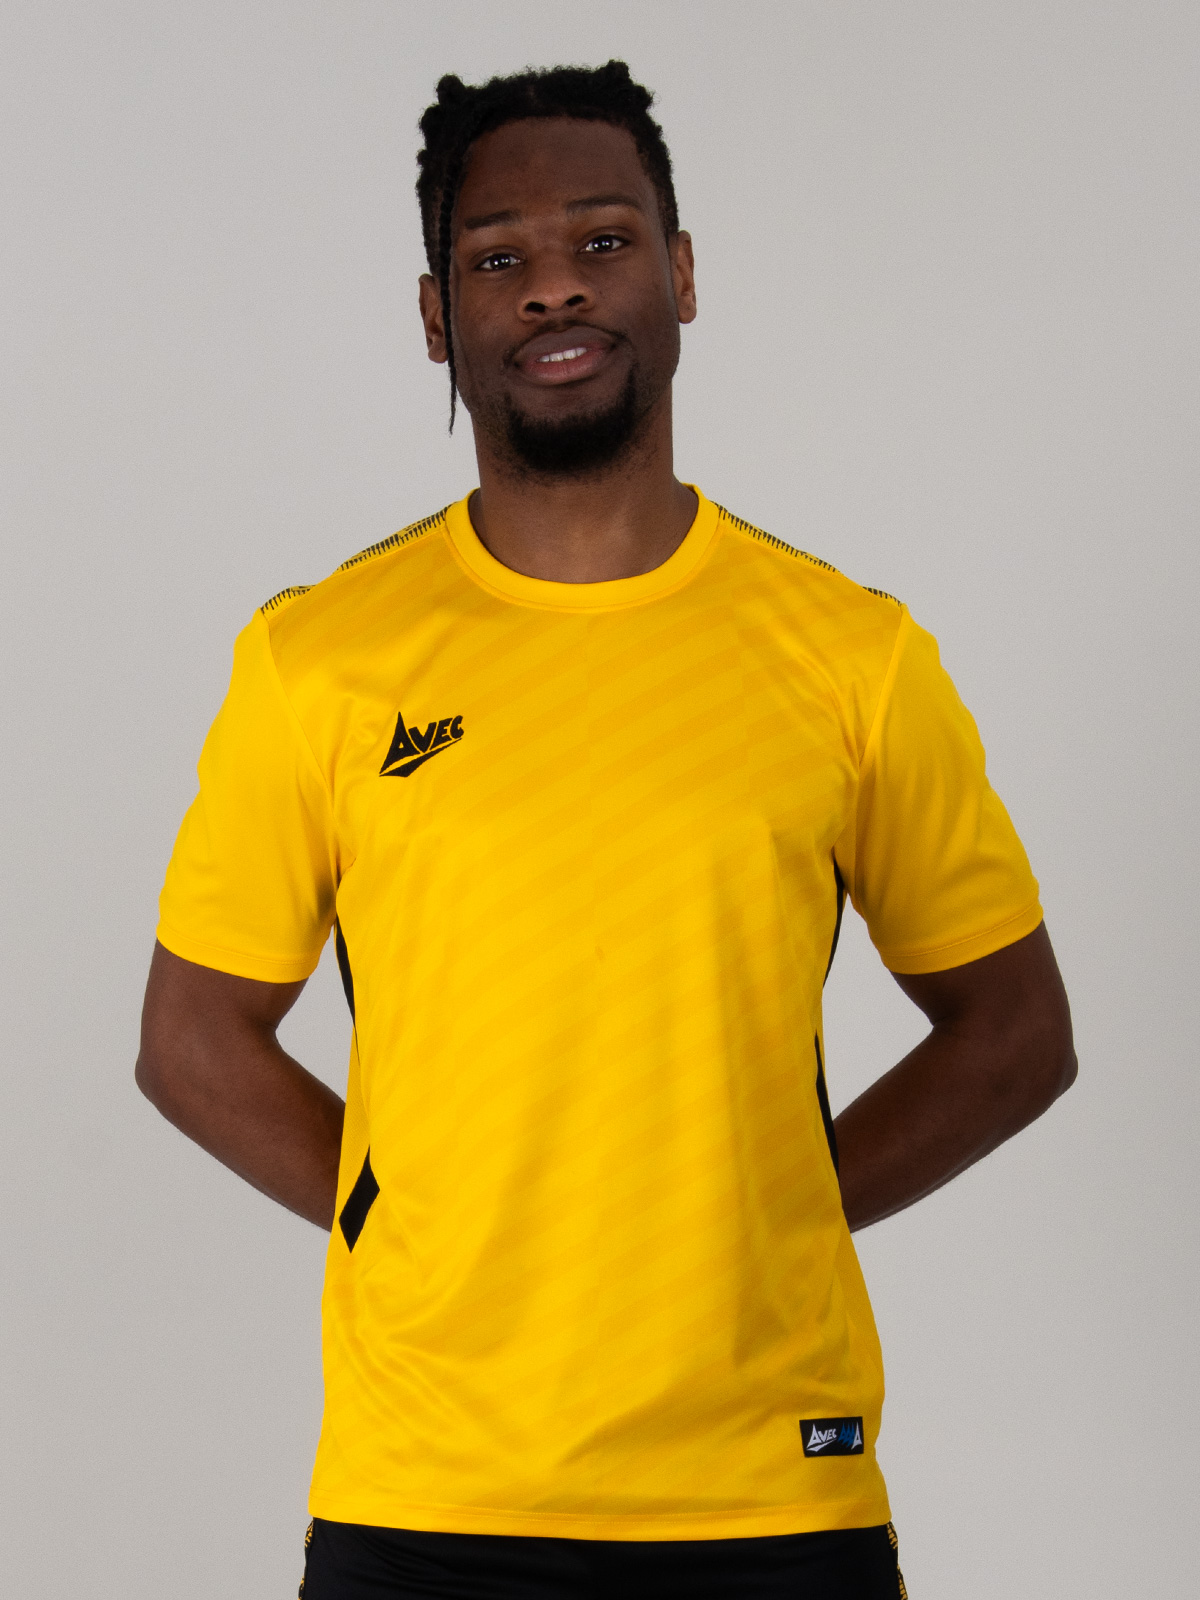 a man is wearing a two-tone yellow football shirt with black details and panels.